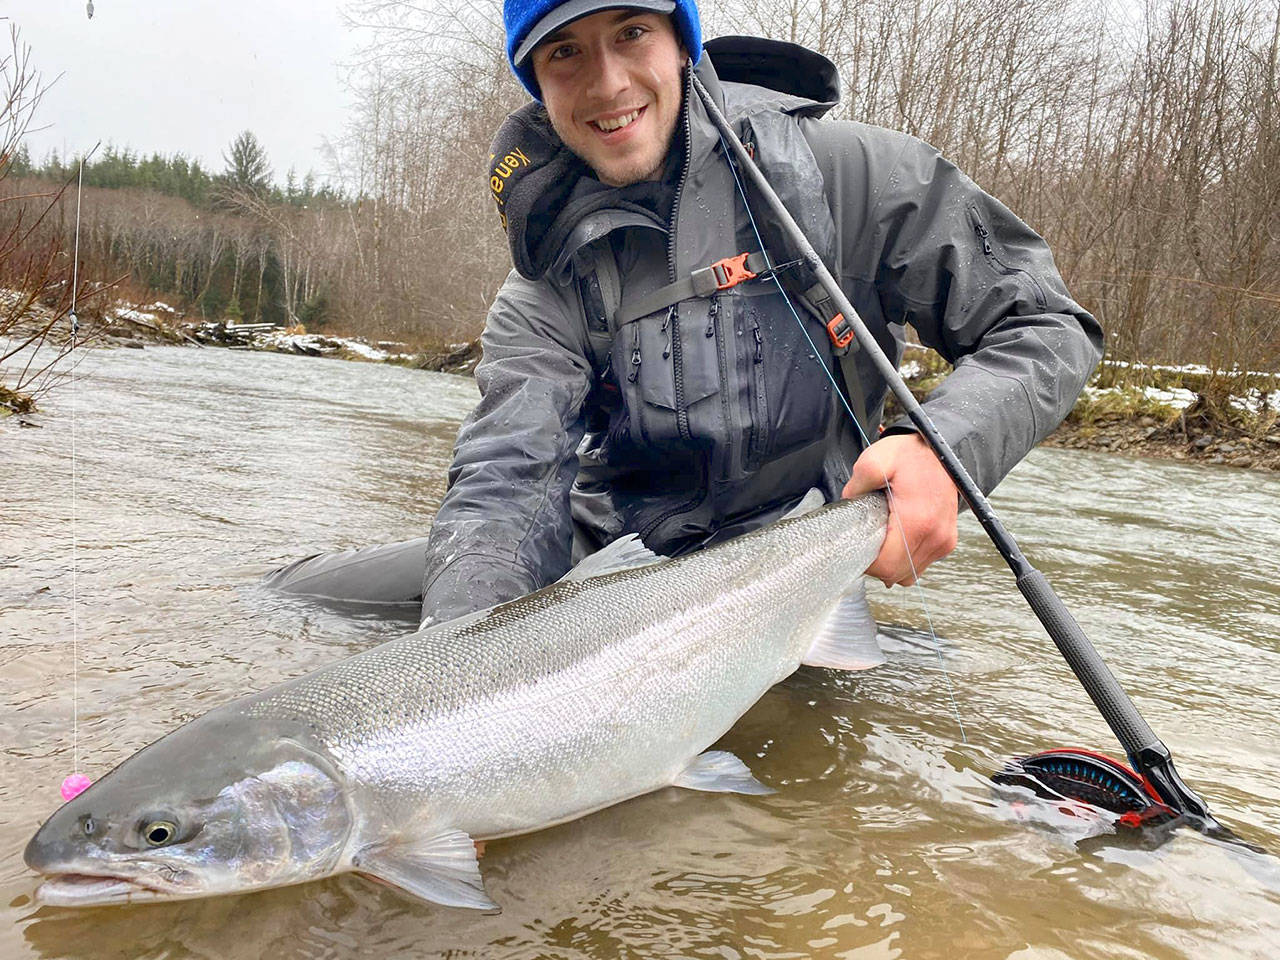 River Journey Guide Service’s Caylen Phegley suffered a number of injuries, including fractured vertebrae in his back, a broken jaw and broken ribs in an apparent hit-and-run collision while helping a friend on a bear hunt earlier this month.